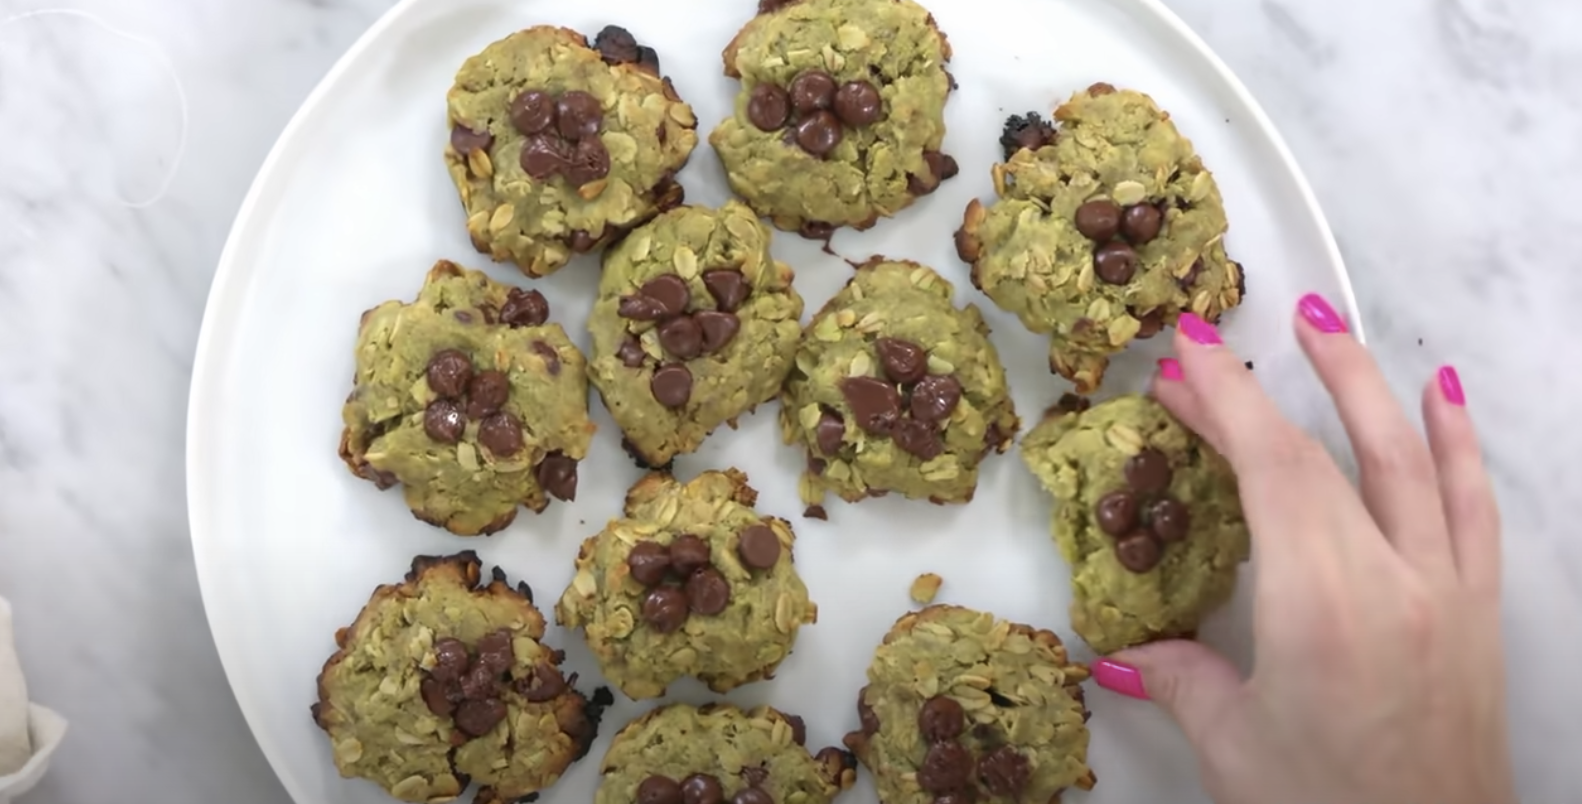 https://www.lifebetweenweekends.com/wp-content/uploads/2020/08/selena-and-chef-recipes-matcha-cookies.png